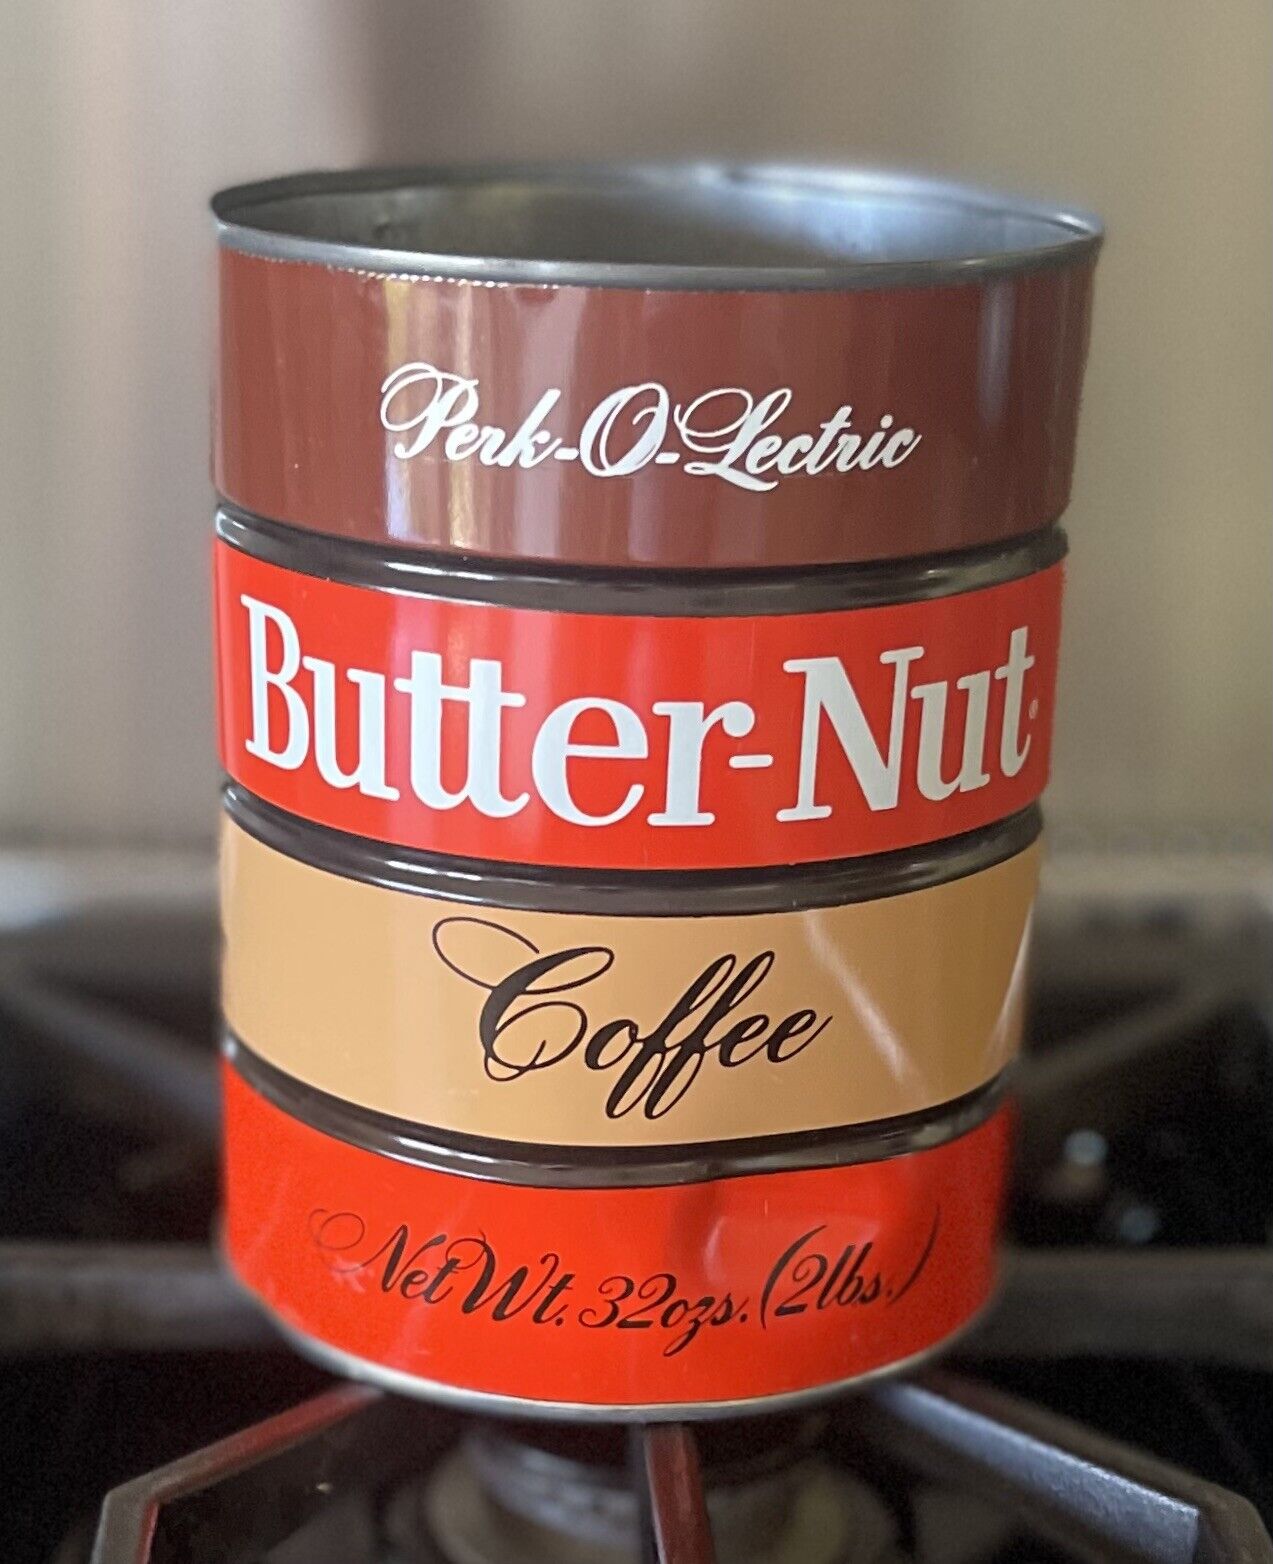 Vintage 32-Ounce Size Butter-Nut Perk-O-Lectric Coffee Can - No Lid, No Coffee